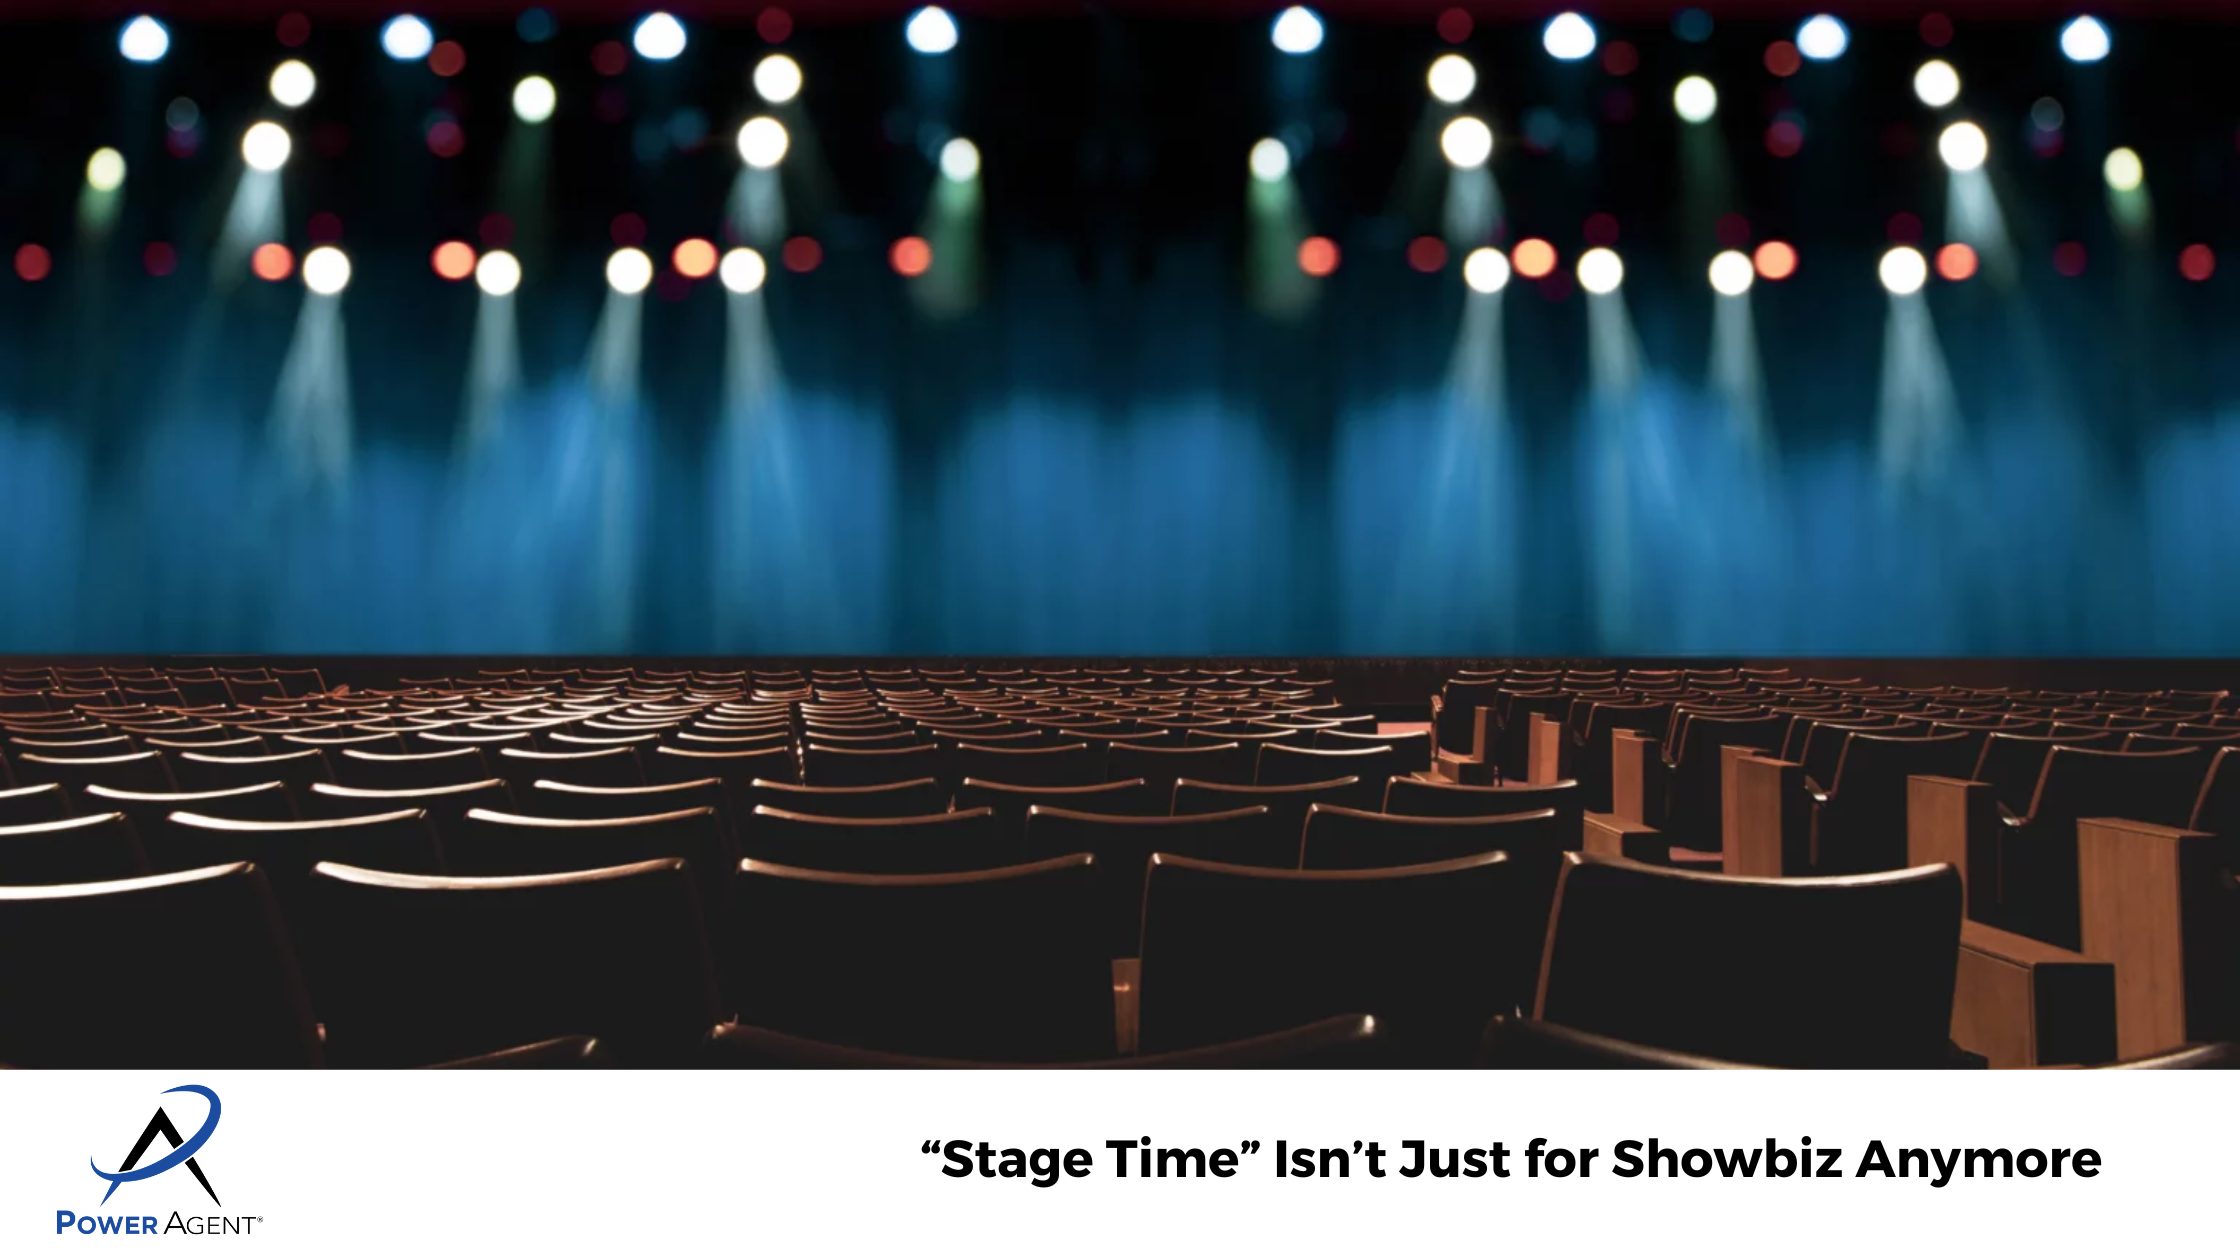 “Stage Time” Isn’t Just for Showbiz Anymore